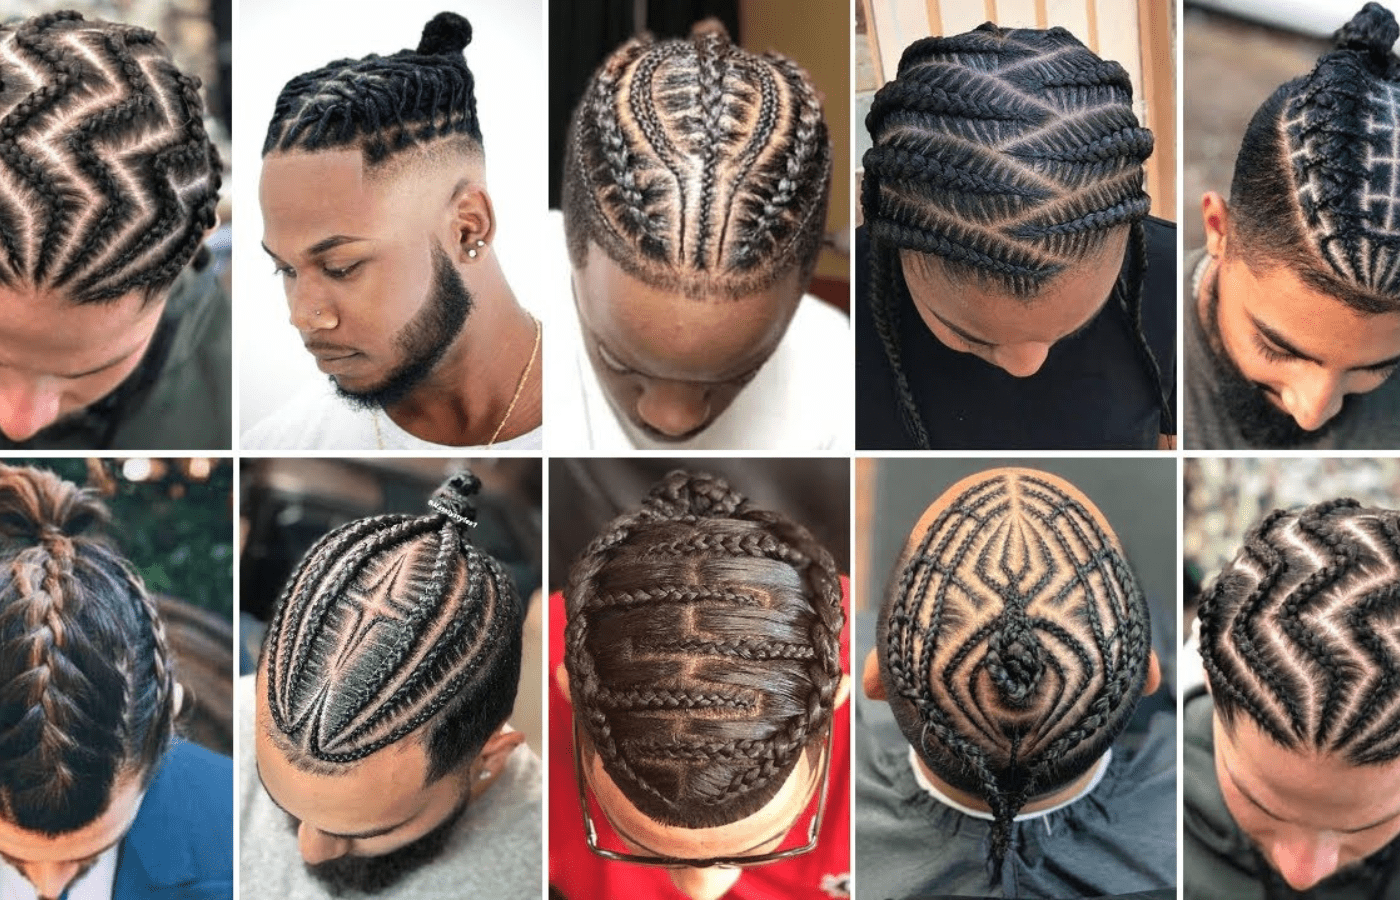 Braid Hairstyles For Men - An Ultimate Guide - The Fashion Fantasy